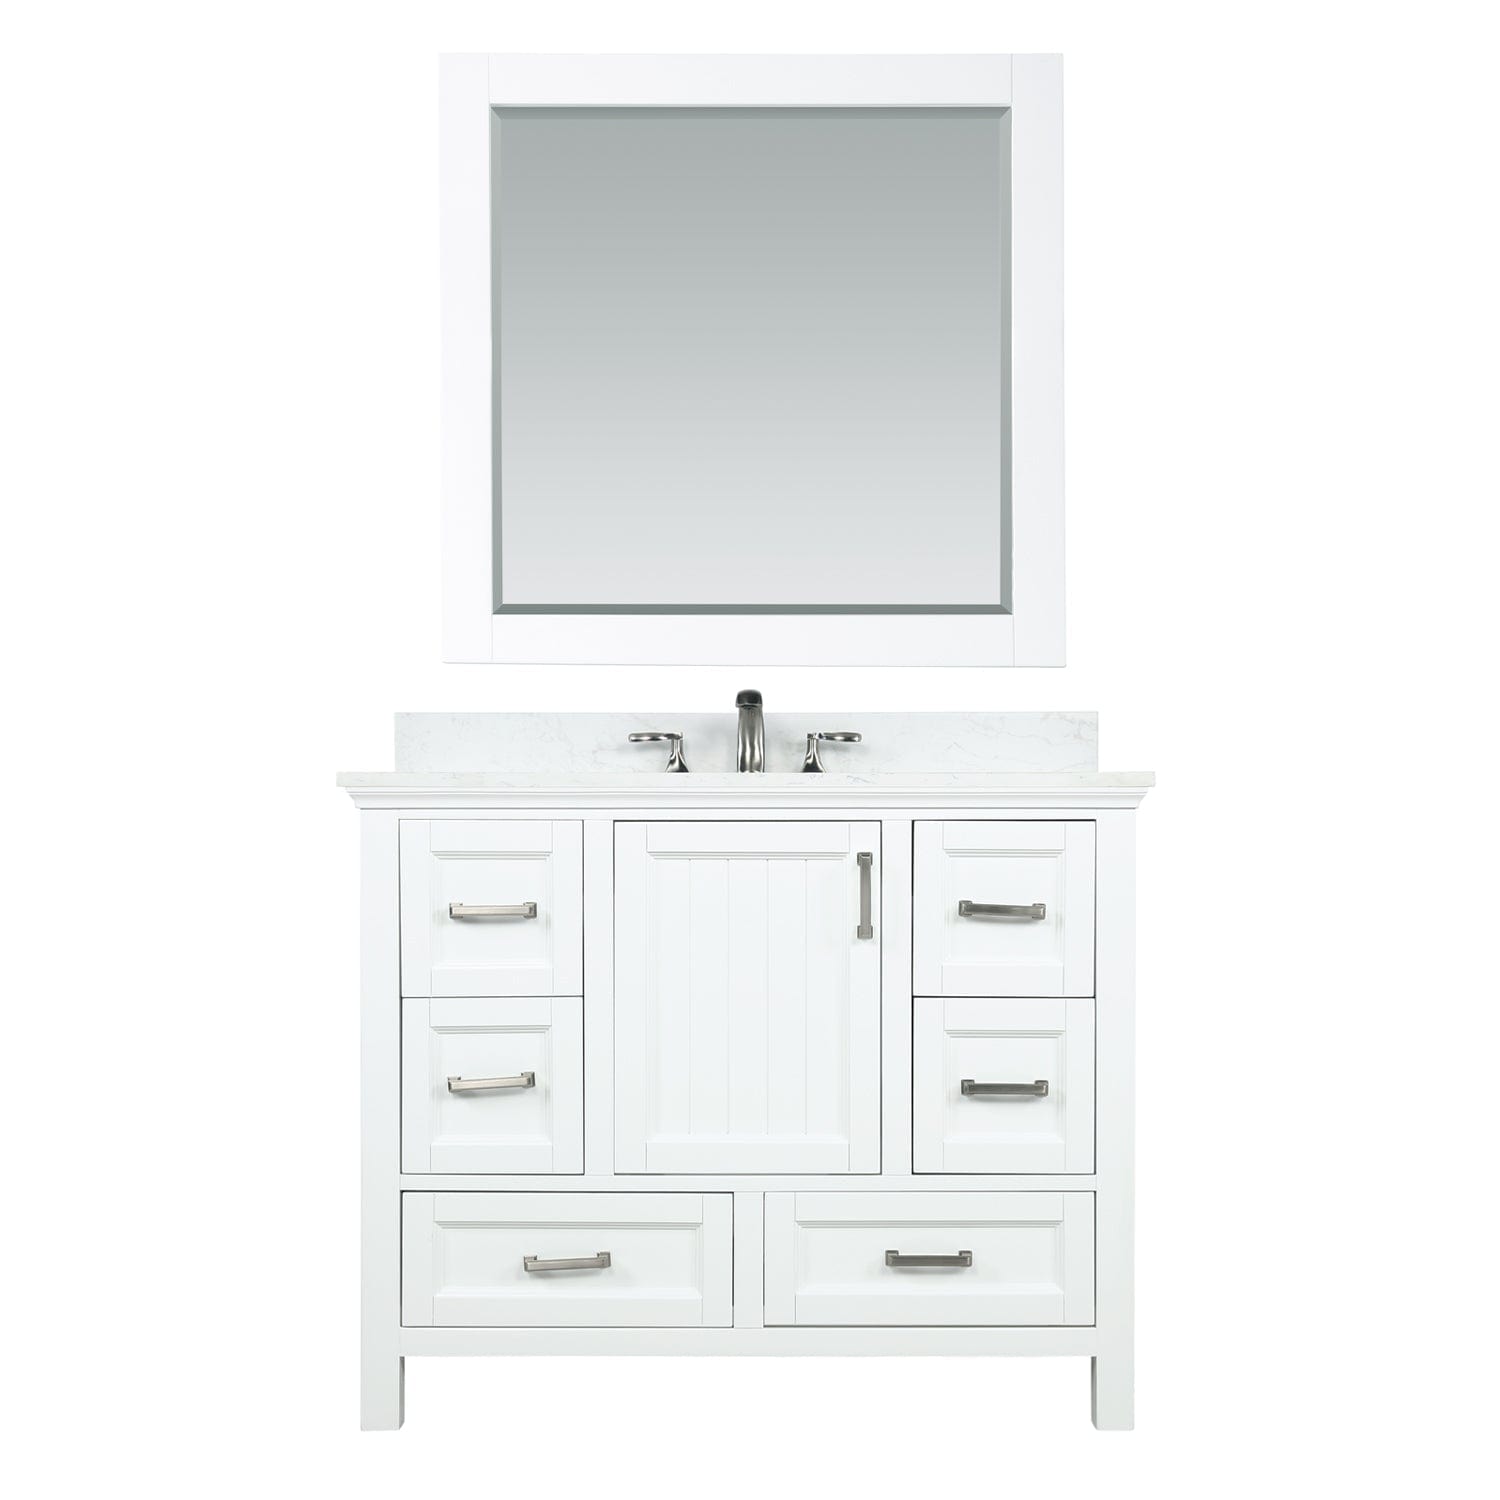 Altair Isla 42" Single Bathroom Vanity Set in White and Carrara White Marble Countertop with Mirror 538042-WH-AW - Molaix696952511338Vanity538042-WH-AW